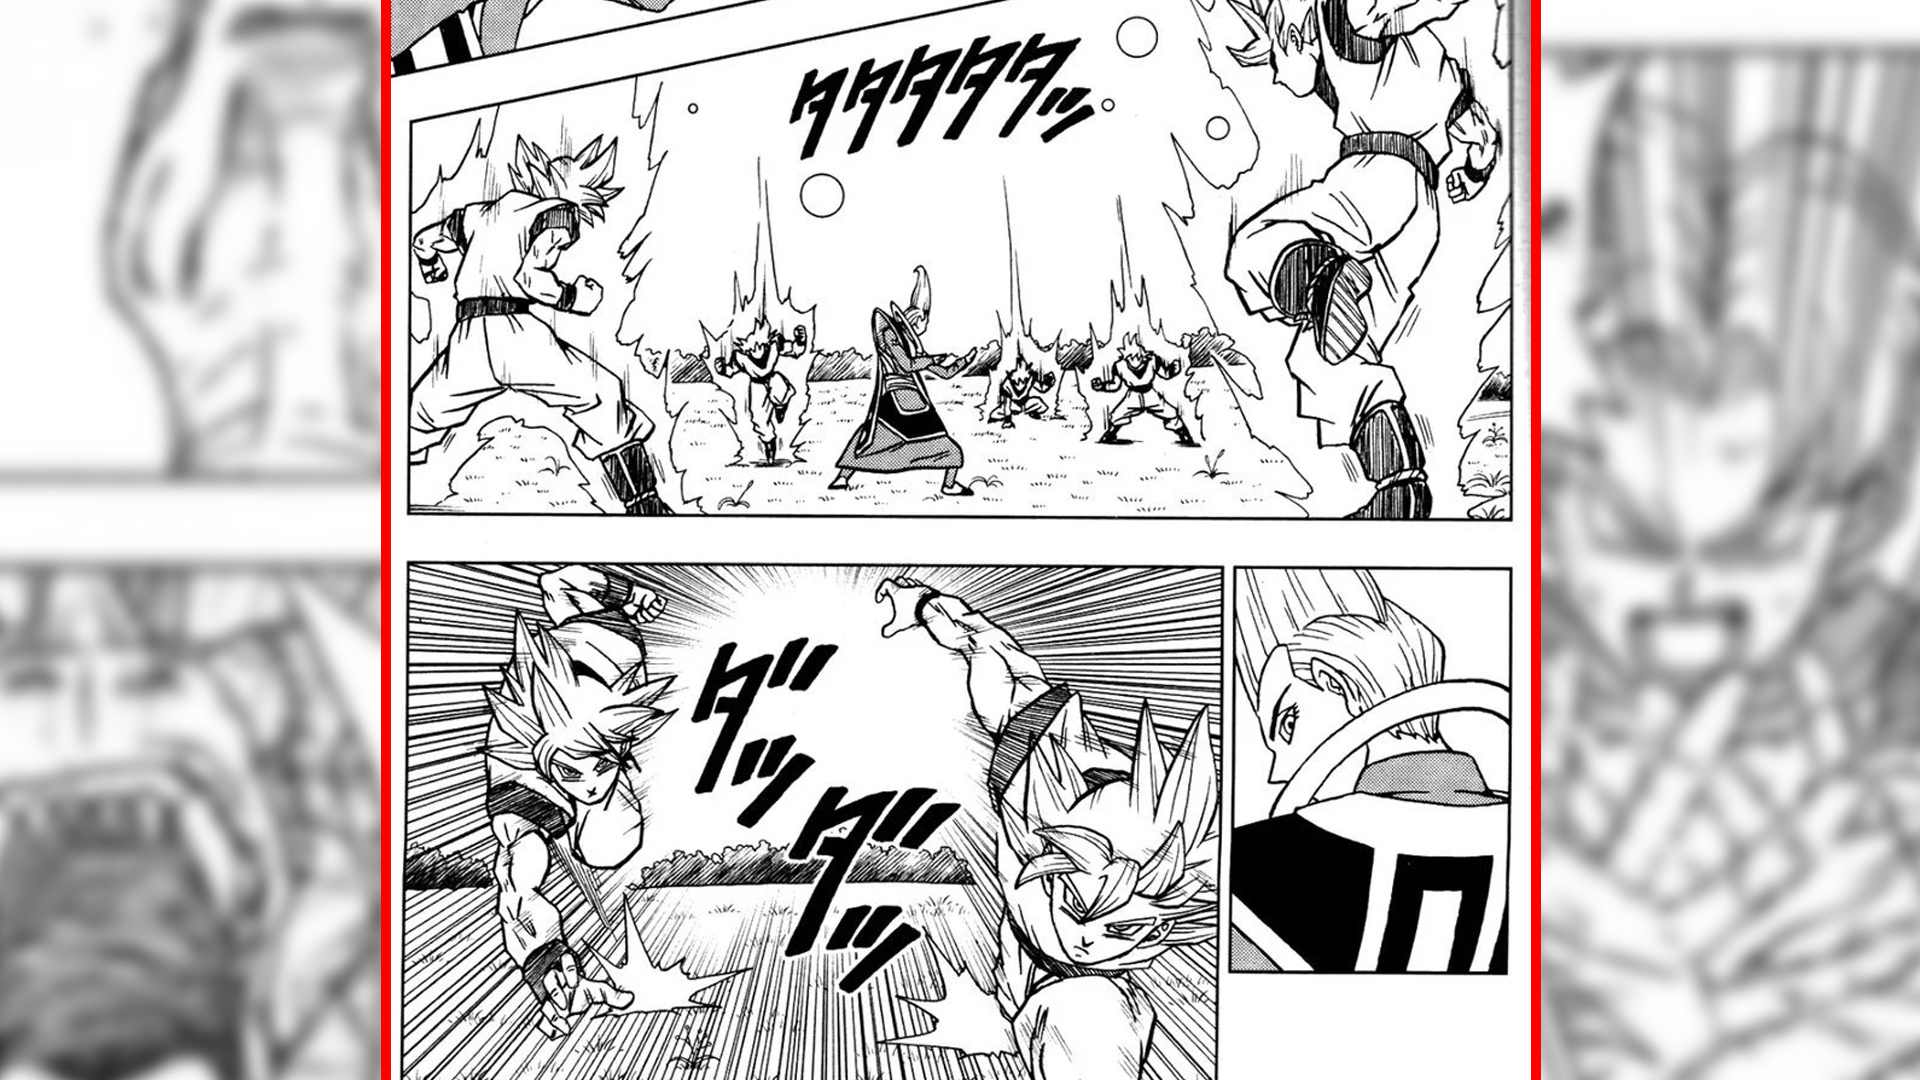 Dragon Ball Super chapter 91 focuses on Piccolo and Pan's quality time as  Krillin is put on a new case